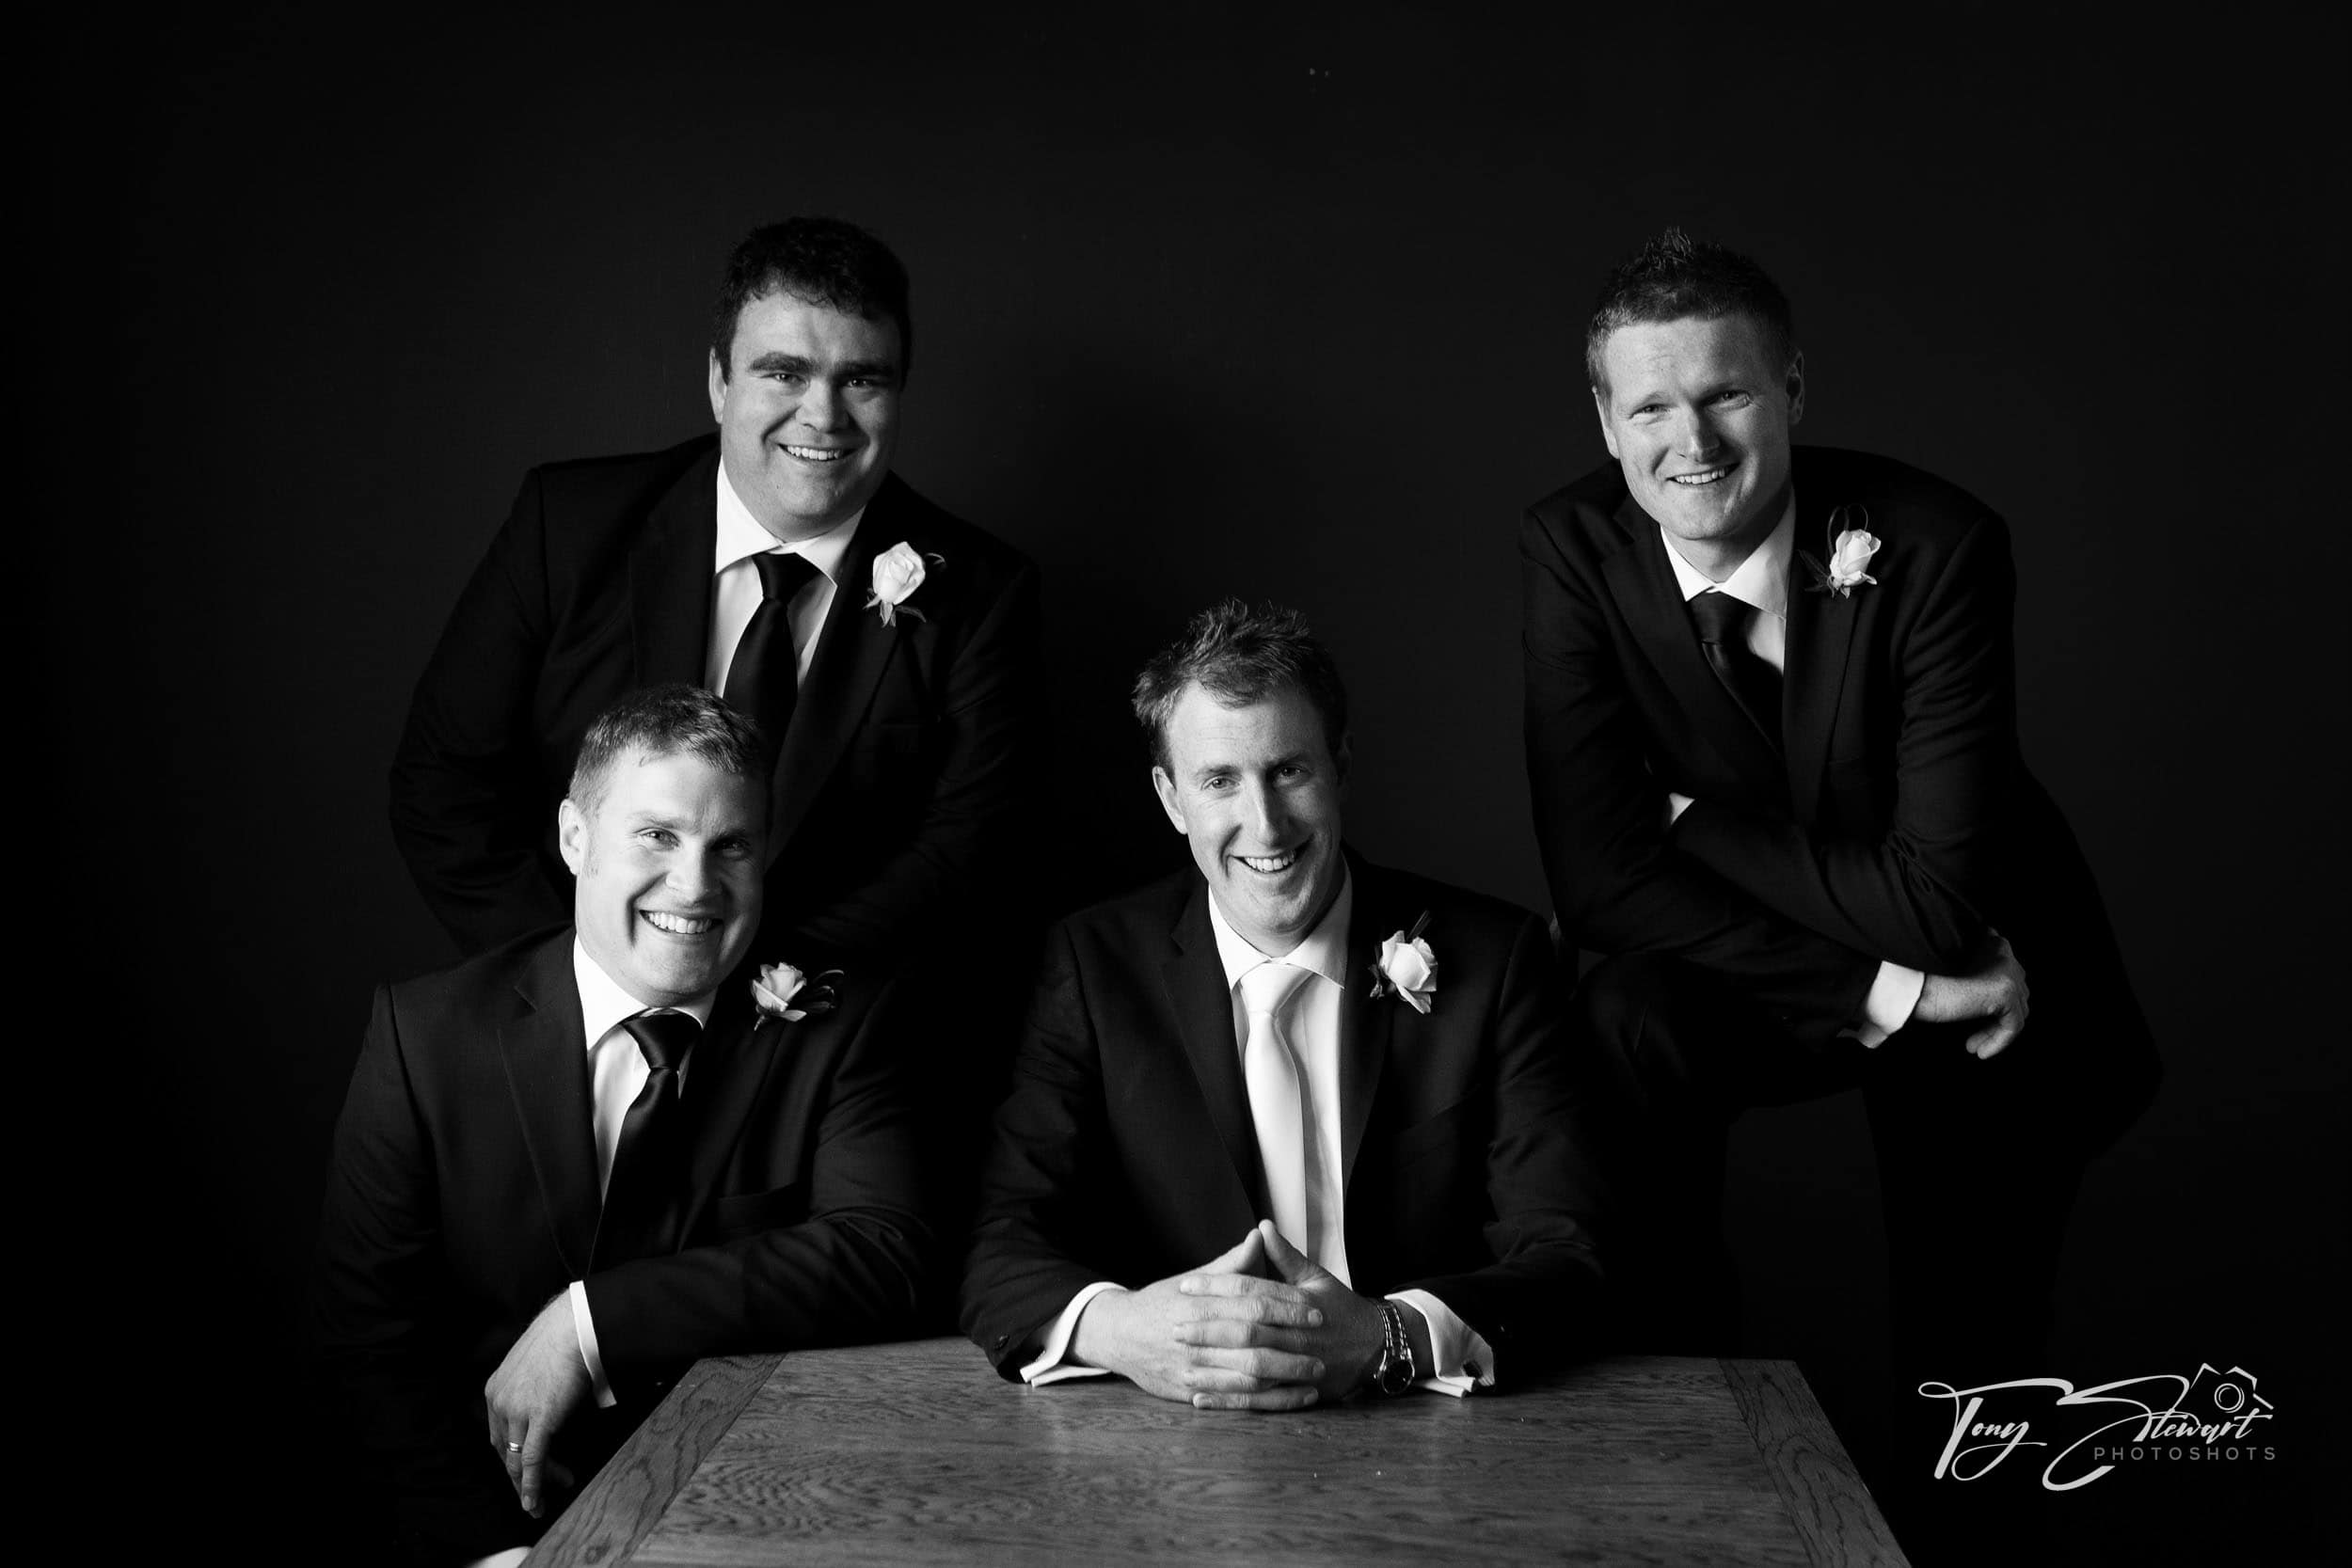 Lads pose with happy groom.